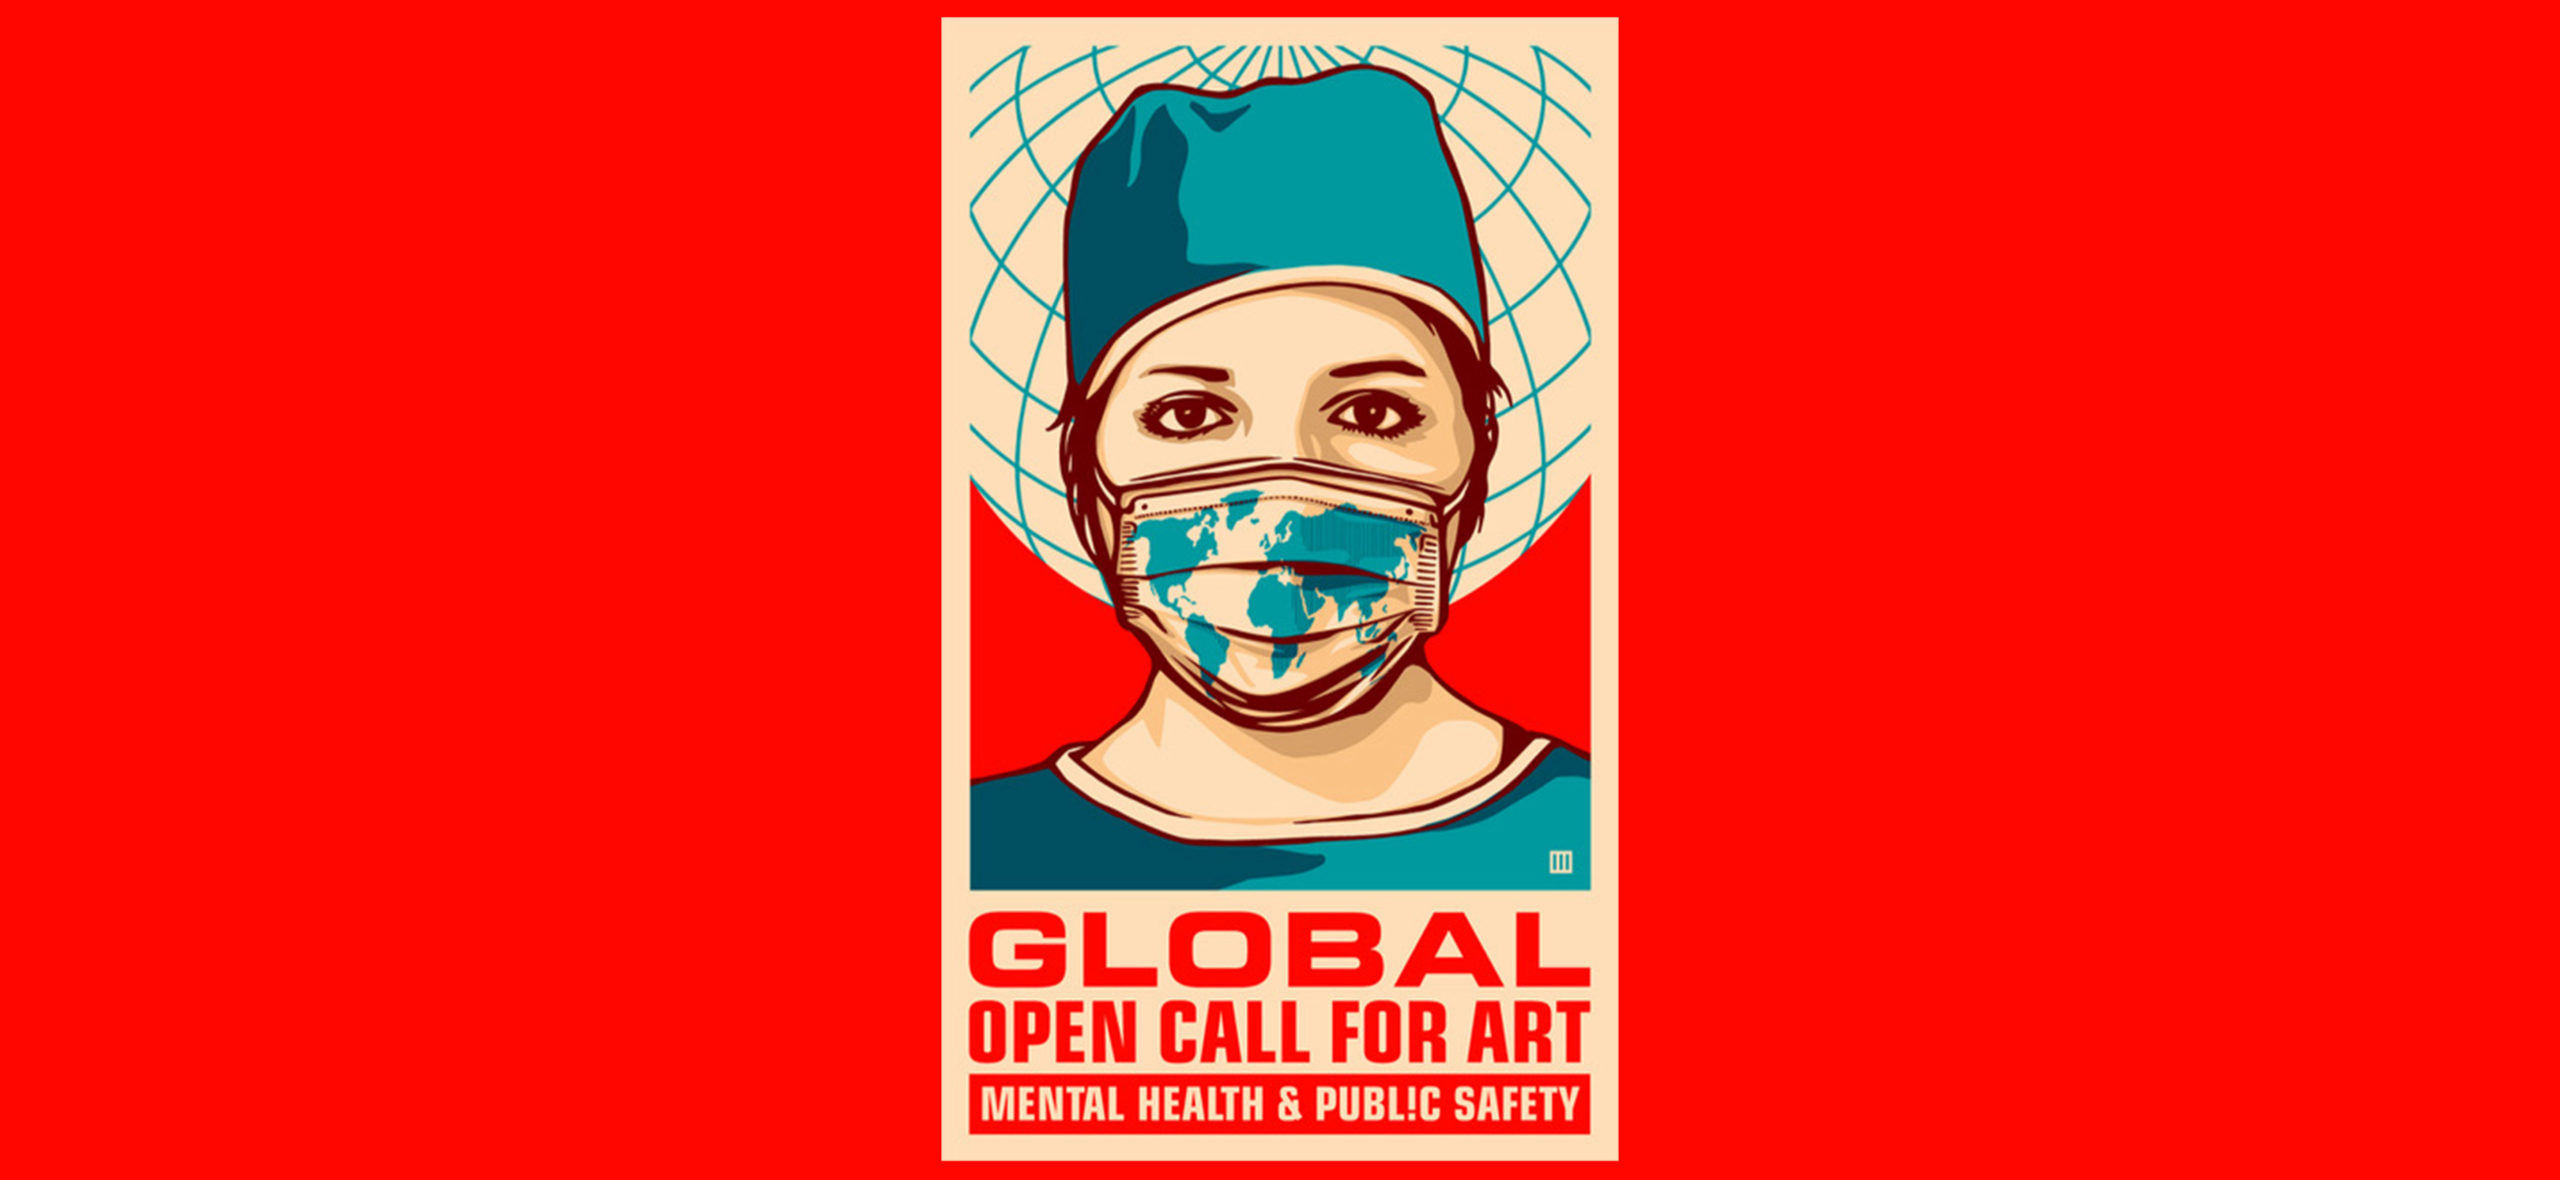 Global Call for Art: The Wellbeing Project and Amplifier Launch Campaign to Promote Mental Health